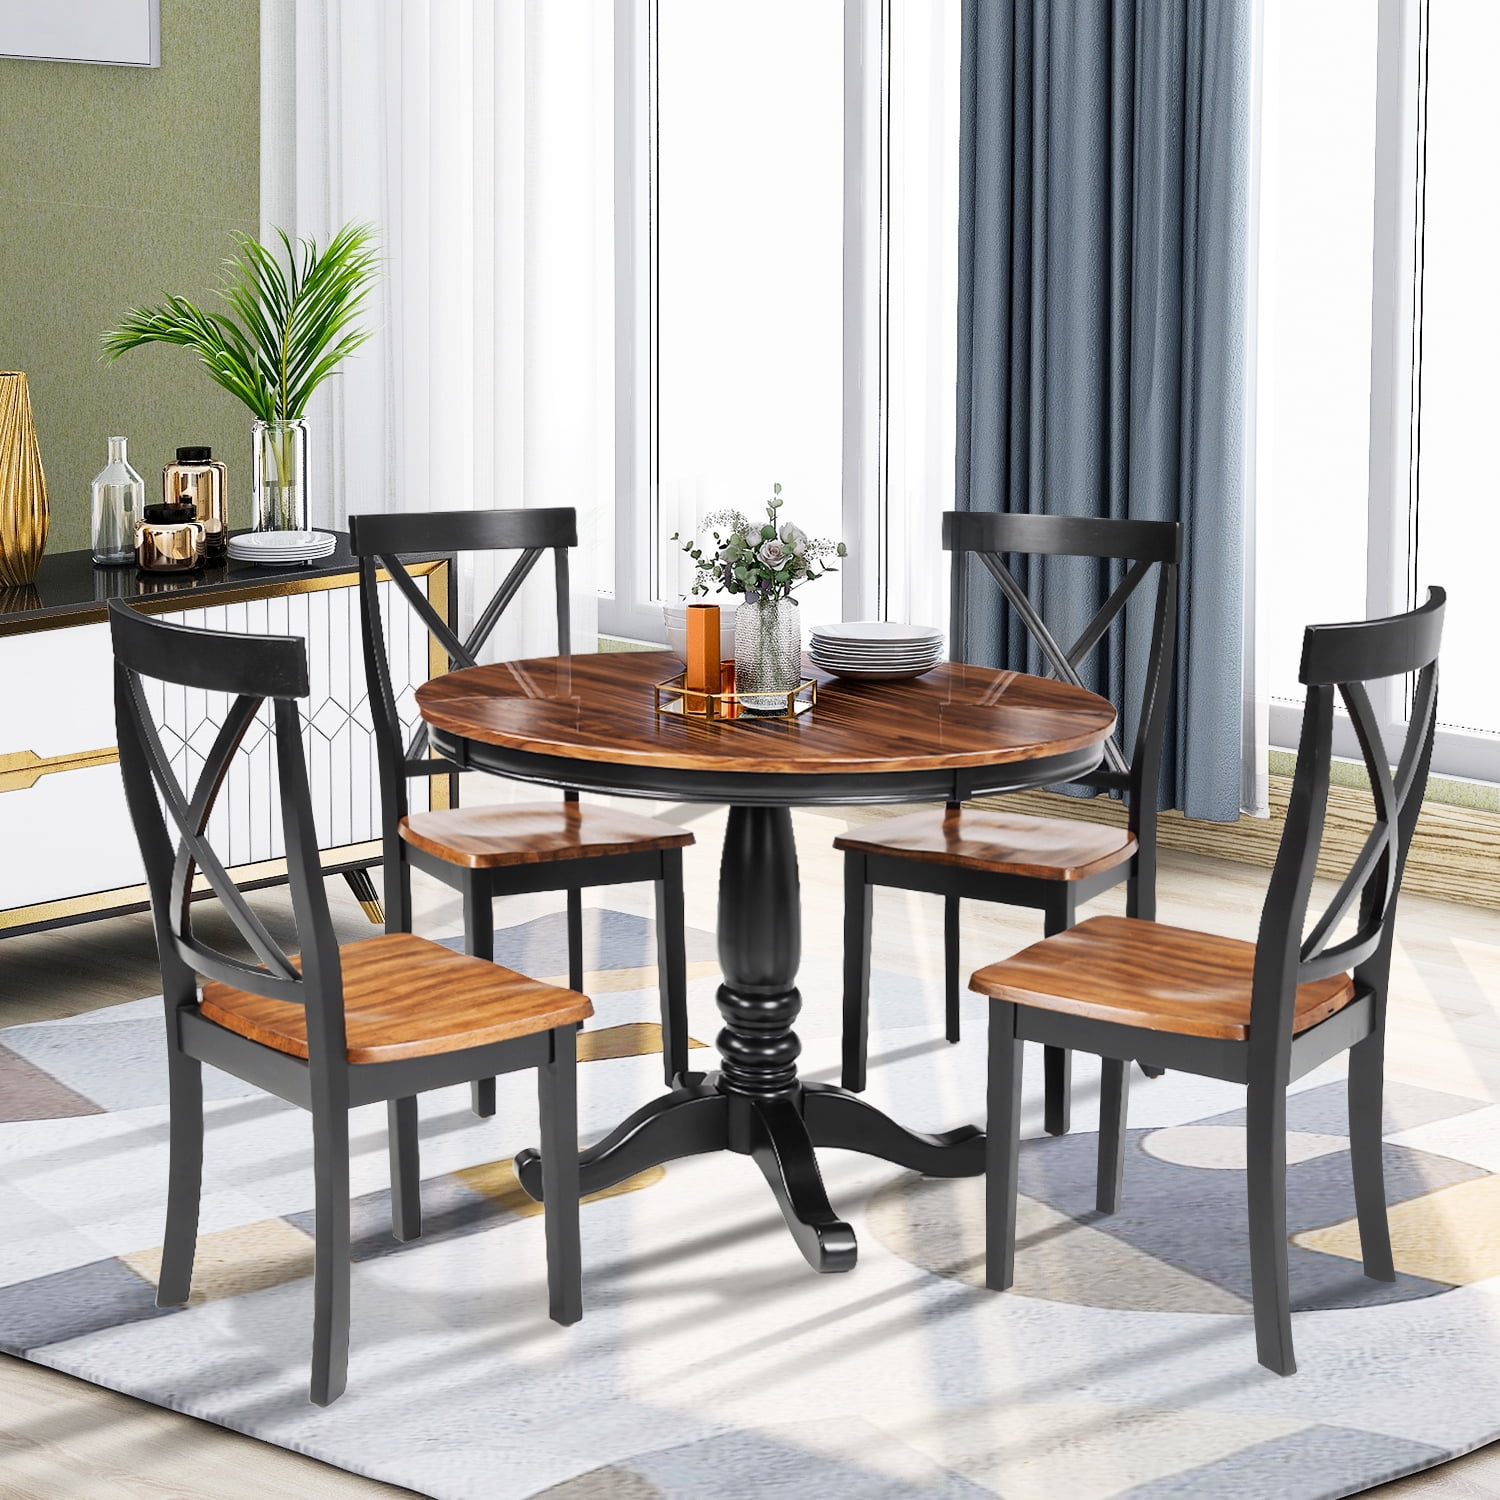 Dining Room Table And Chairs Set, Kitchen Round Table And Chairs Set